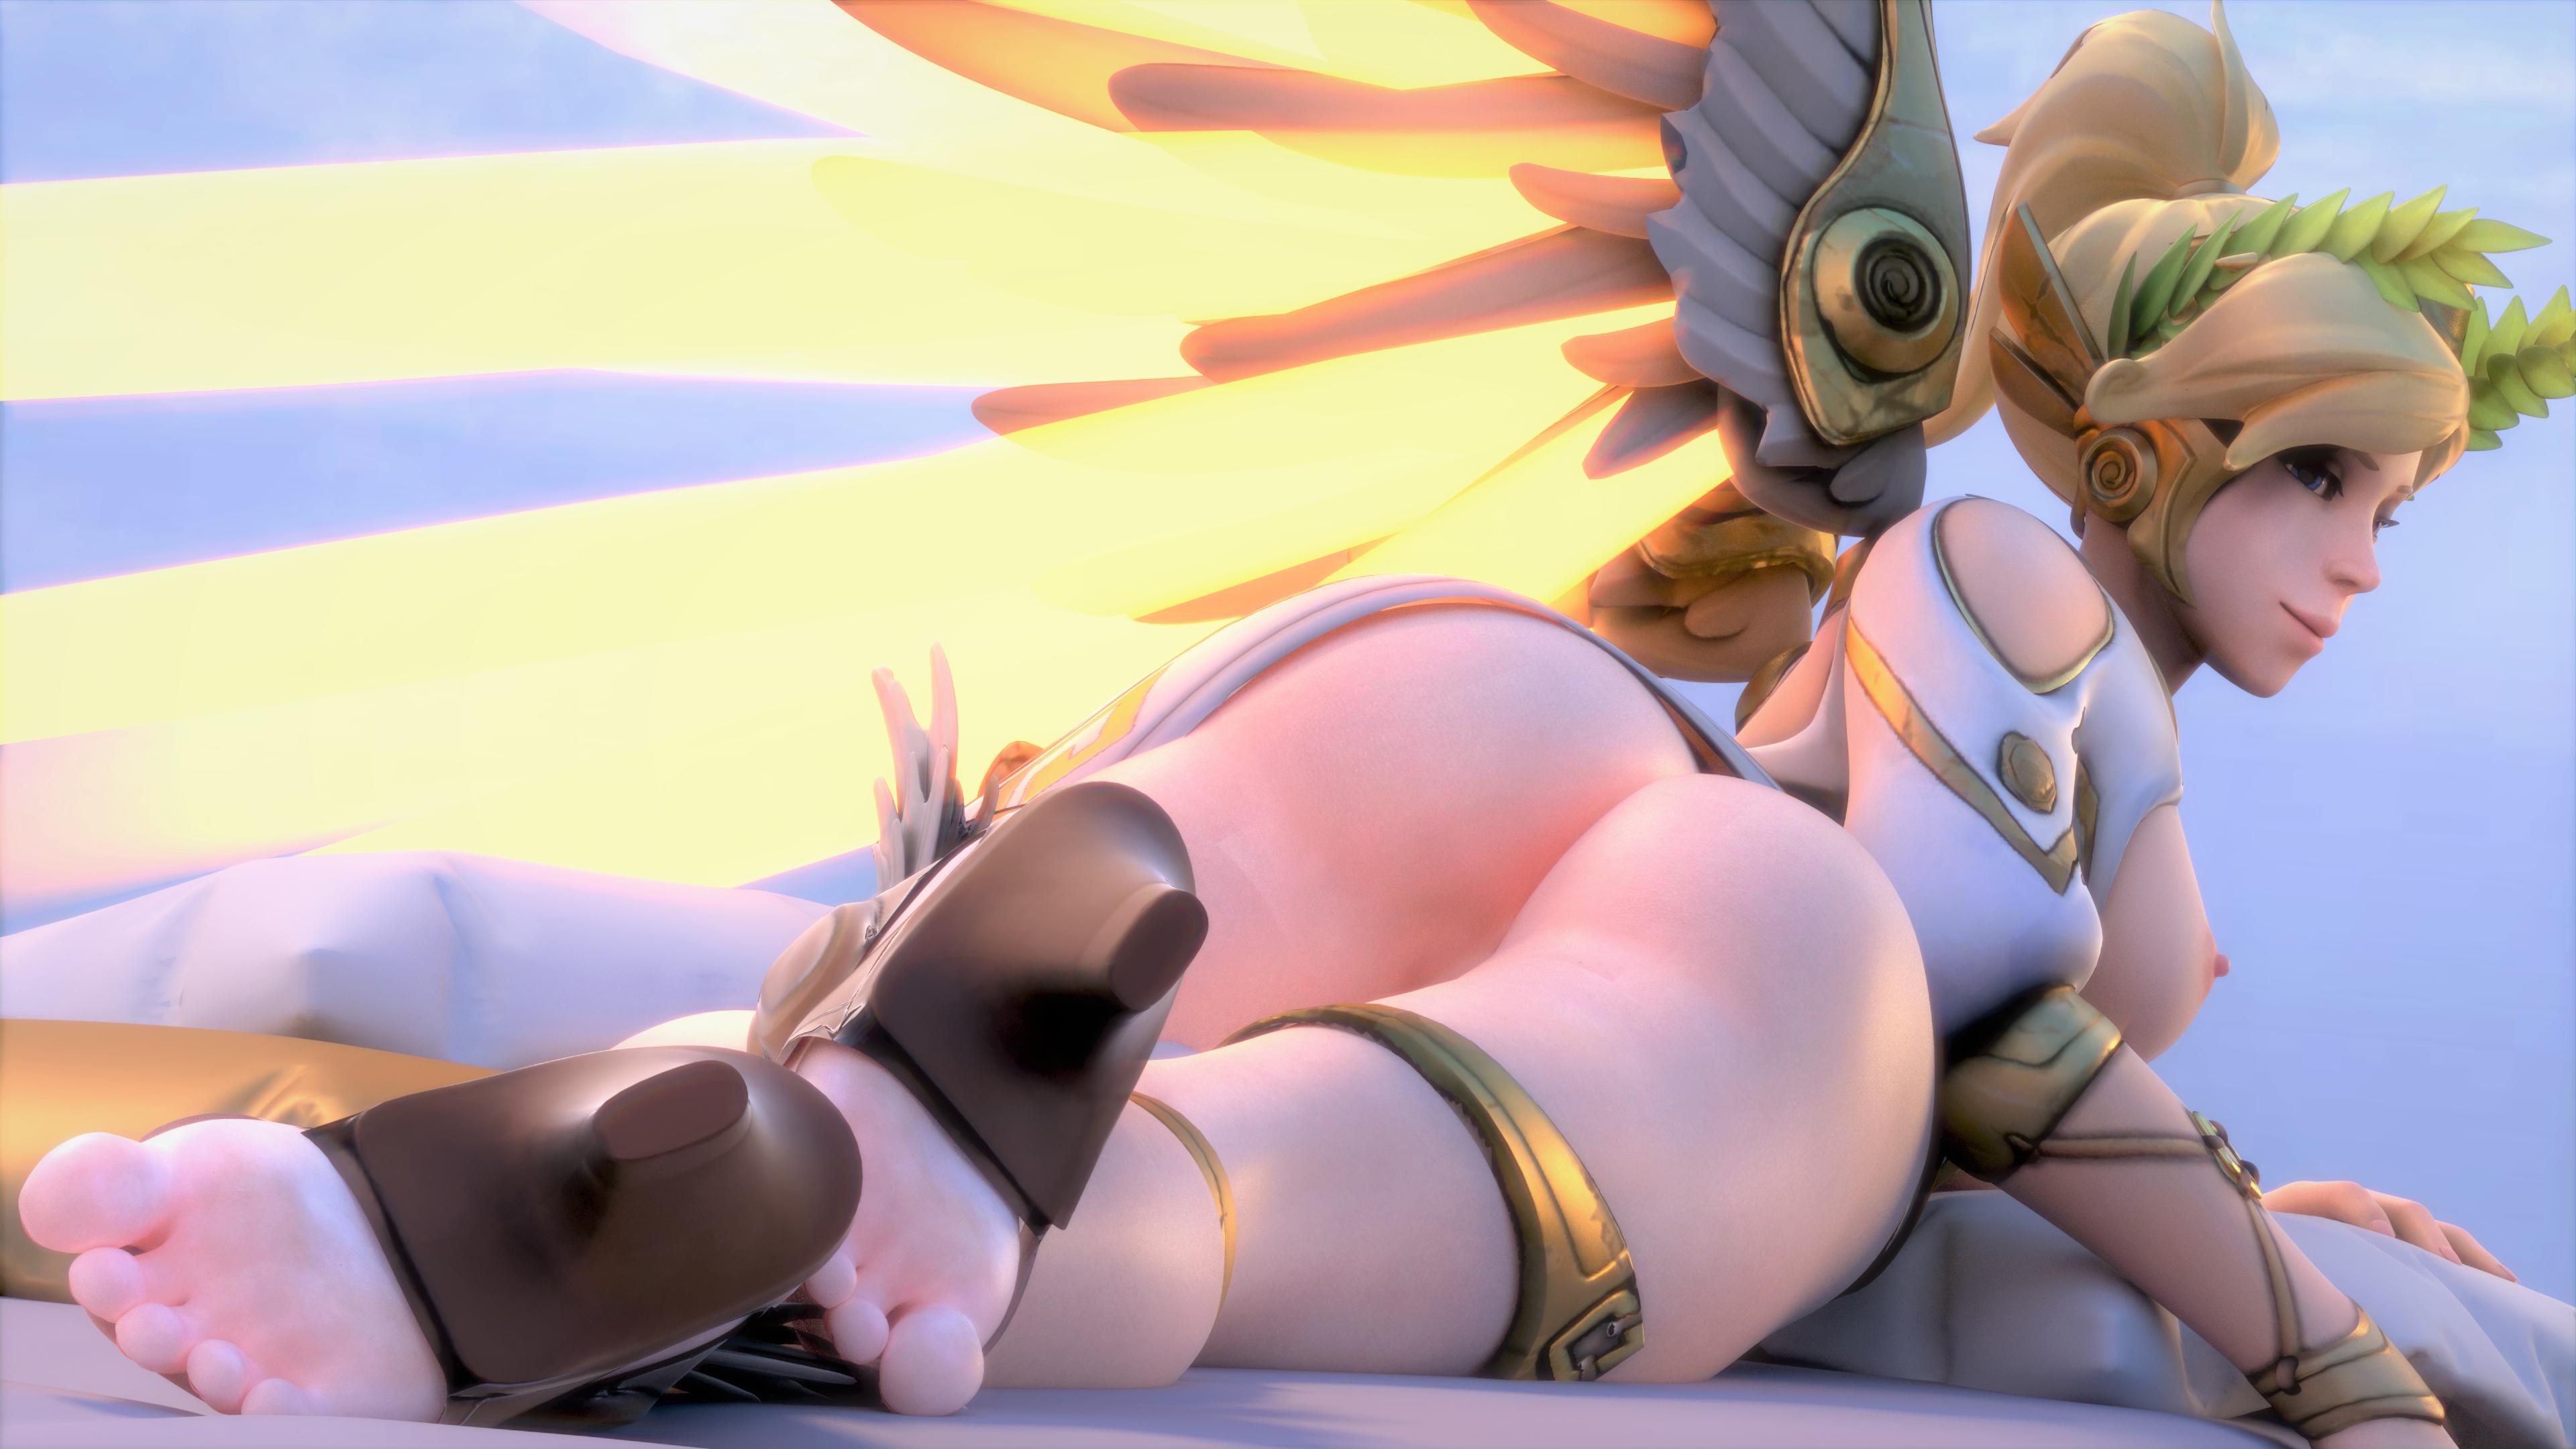 Black I. recommend best of winged victory mercy overwatch